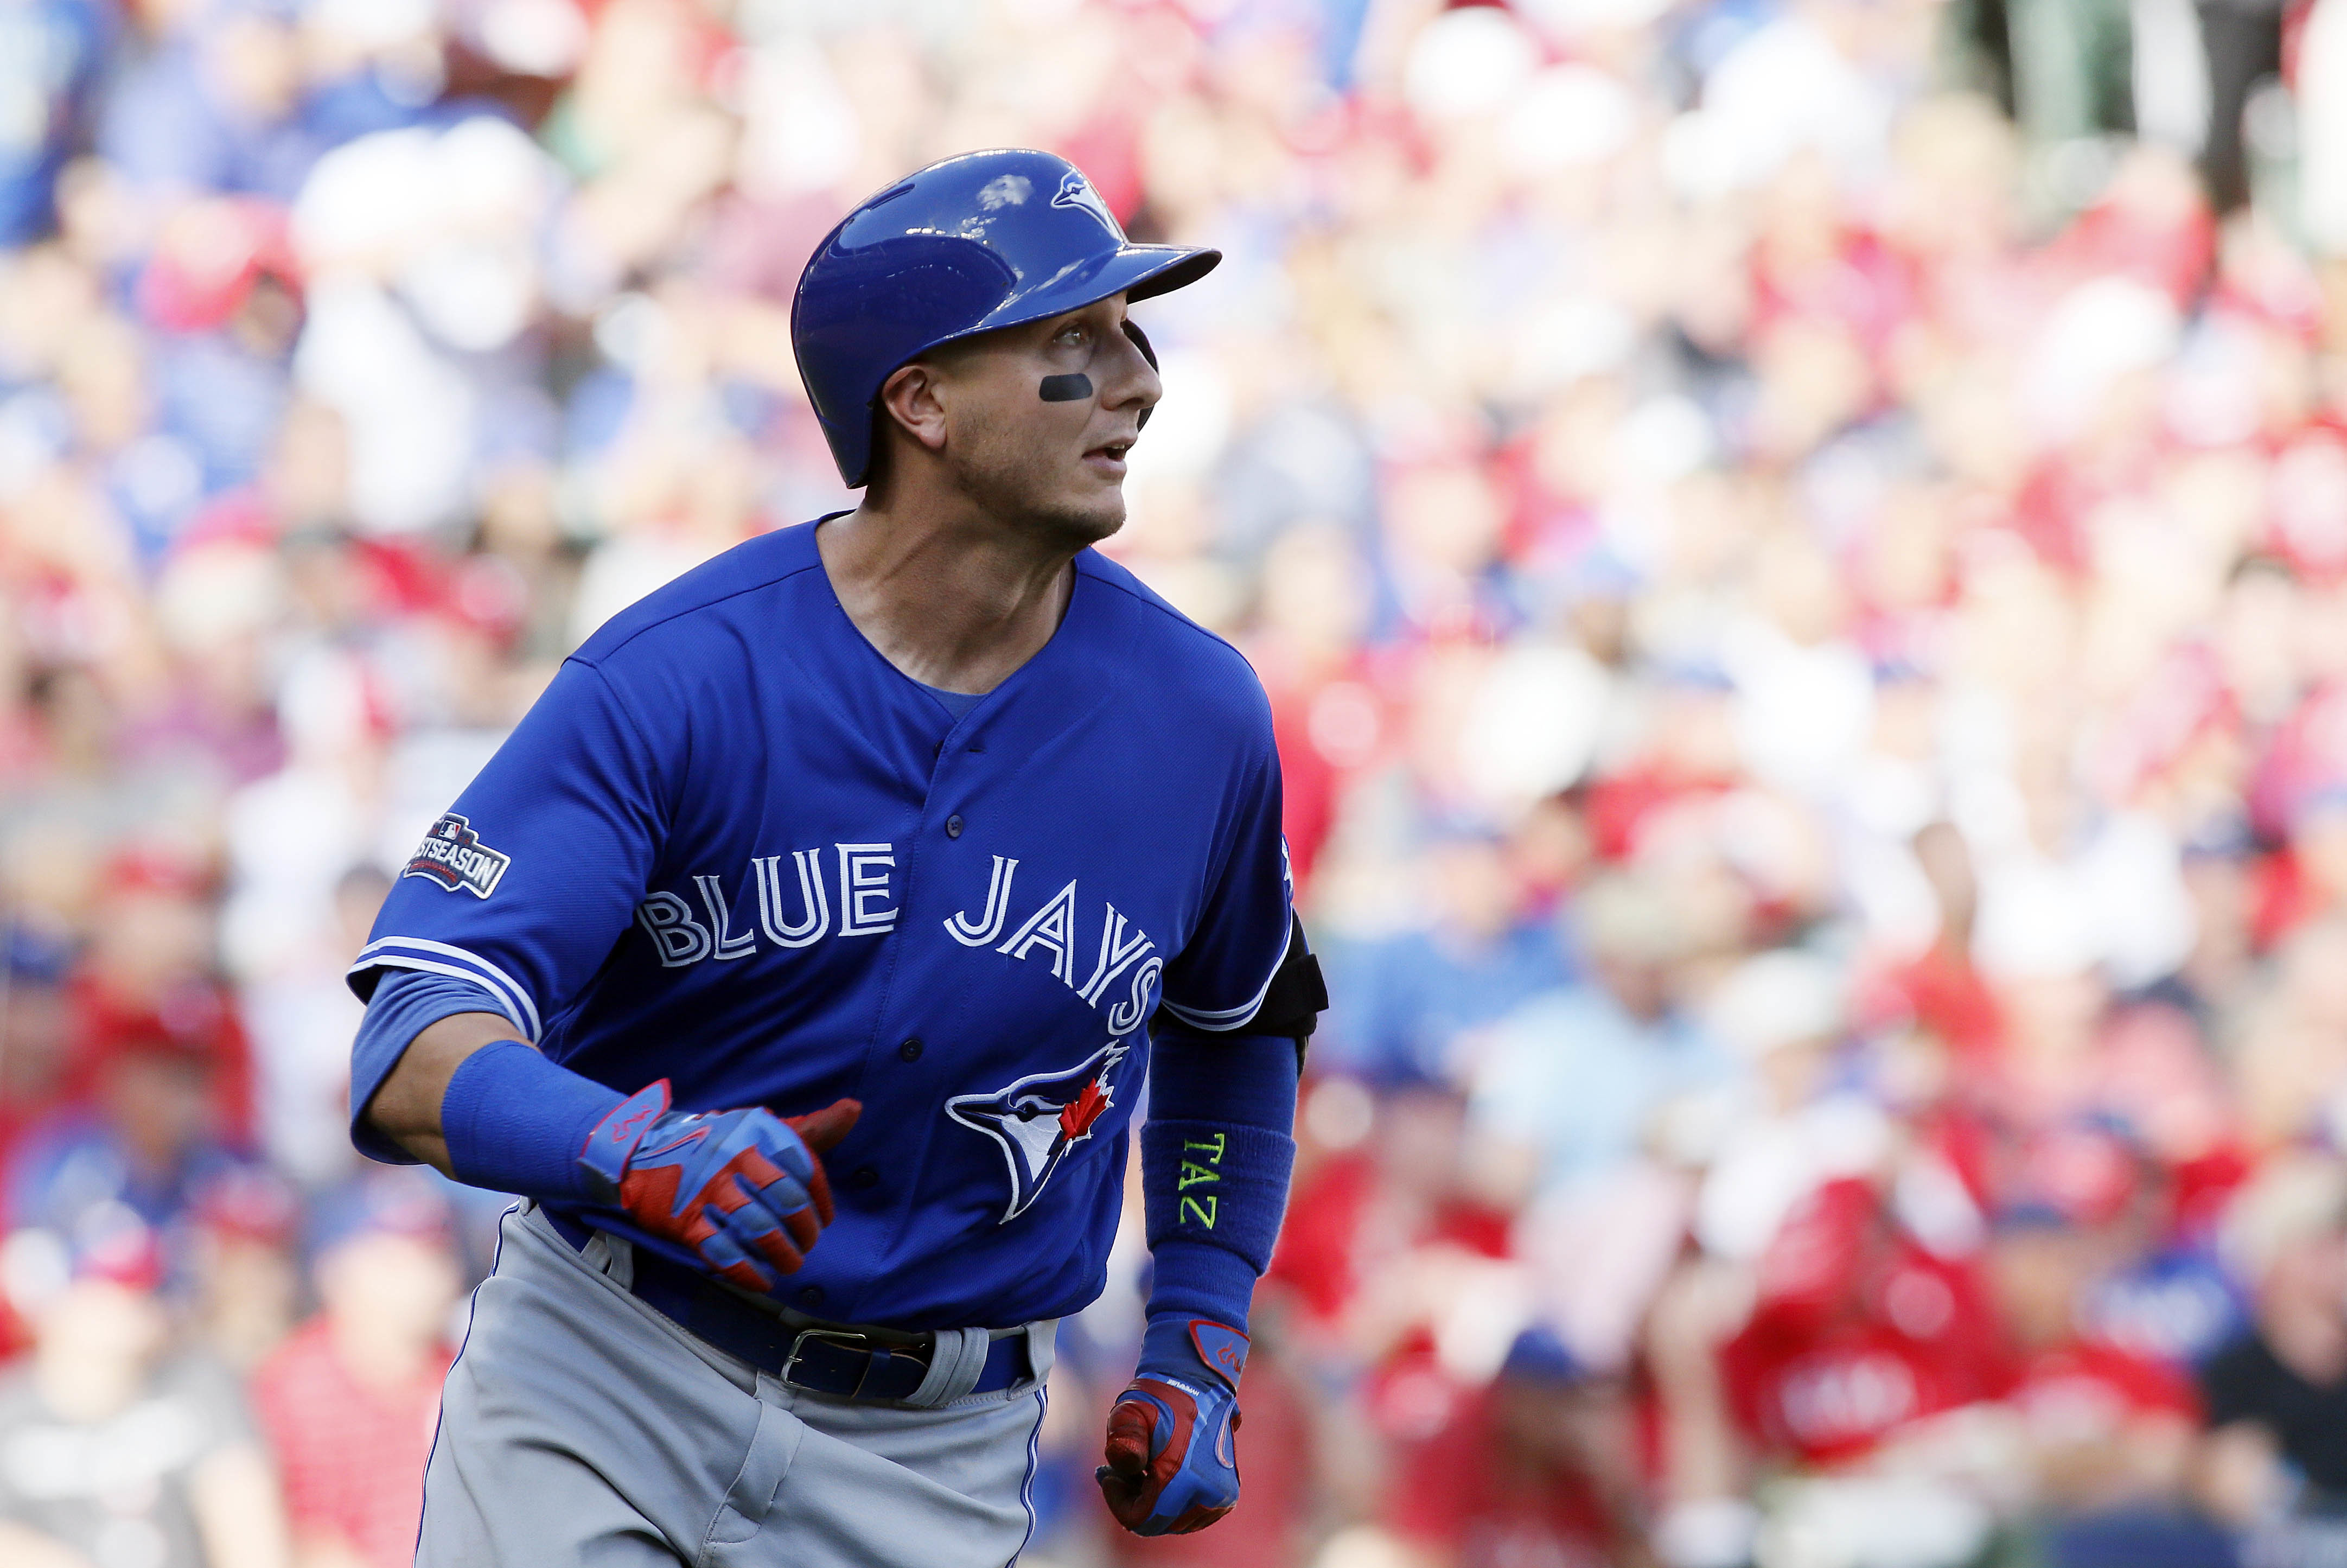 Blue Jays' Troy Tulowitzki faces another season of challenge: 'I haven't  been the player that I wanted to be since I was here' - The Athletic